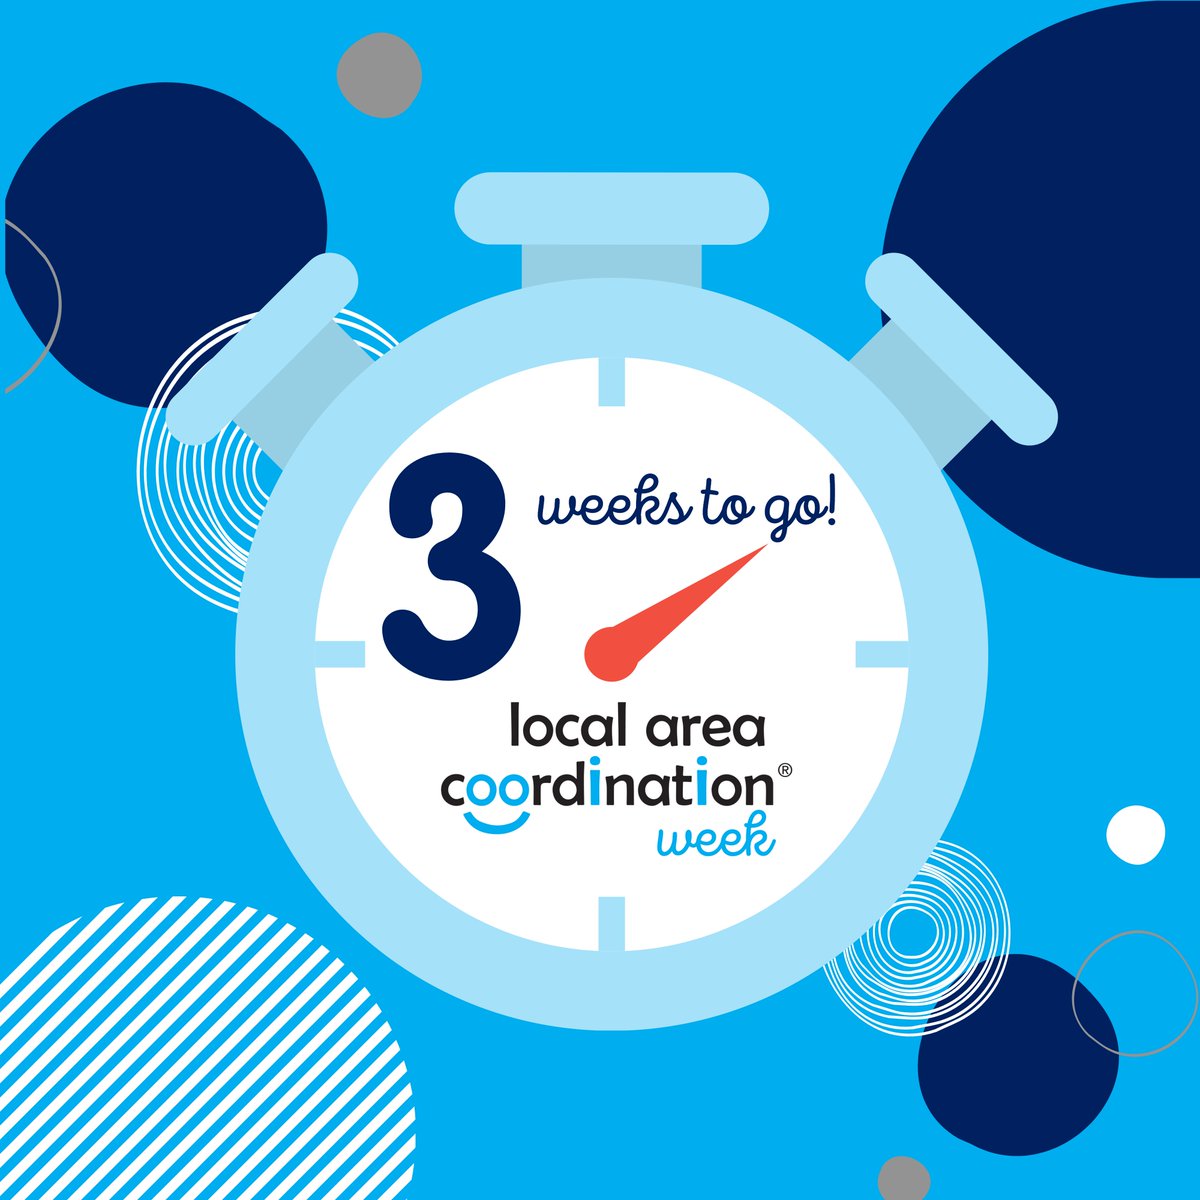 #LocalAreaCoordinationWeek is coming up in just THREE WEEKS’ TIME! We have planned a bunch of activities for @LACNetworkUK members, as well as lots of exciting content to share with you all through social media. The countdown is officially on!